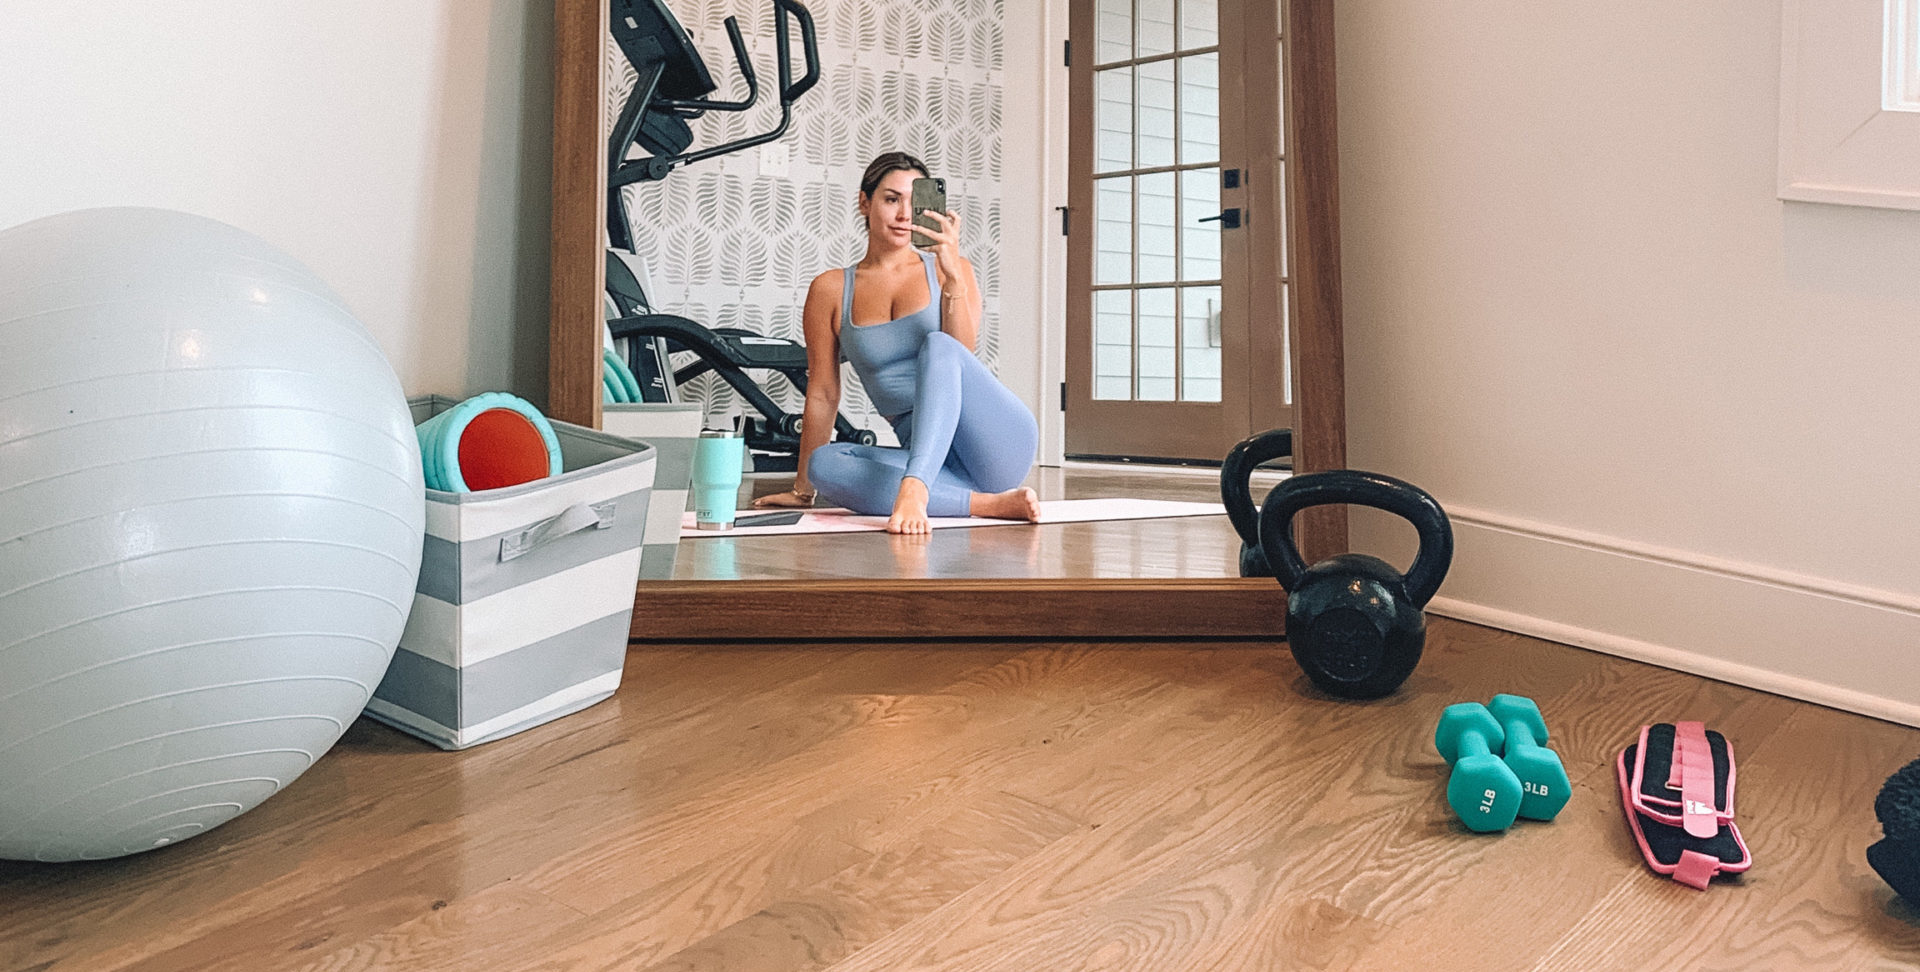 At Home Workout Essentials